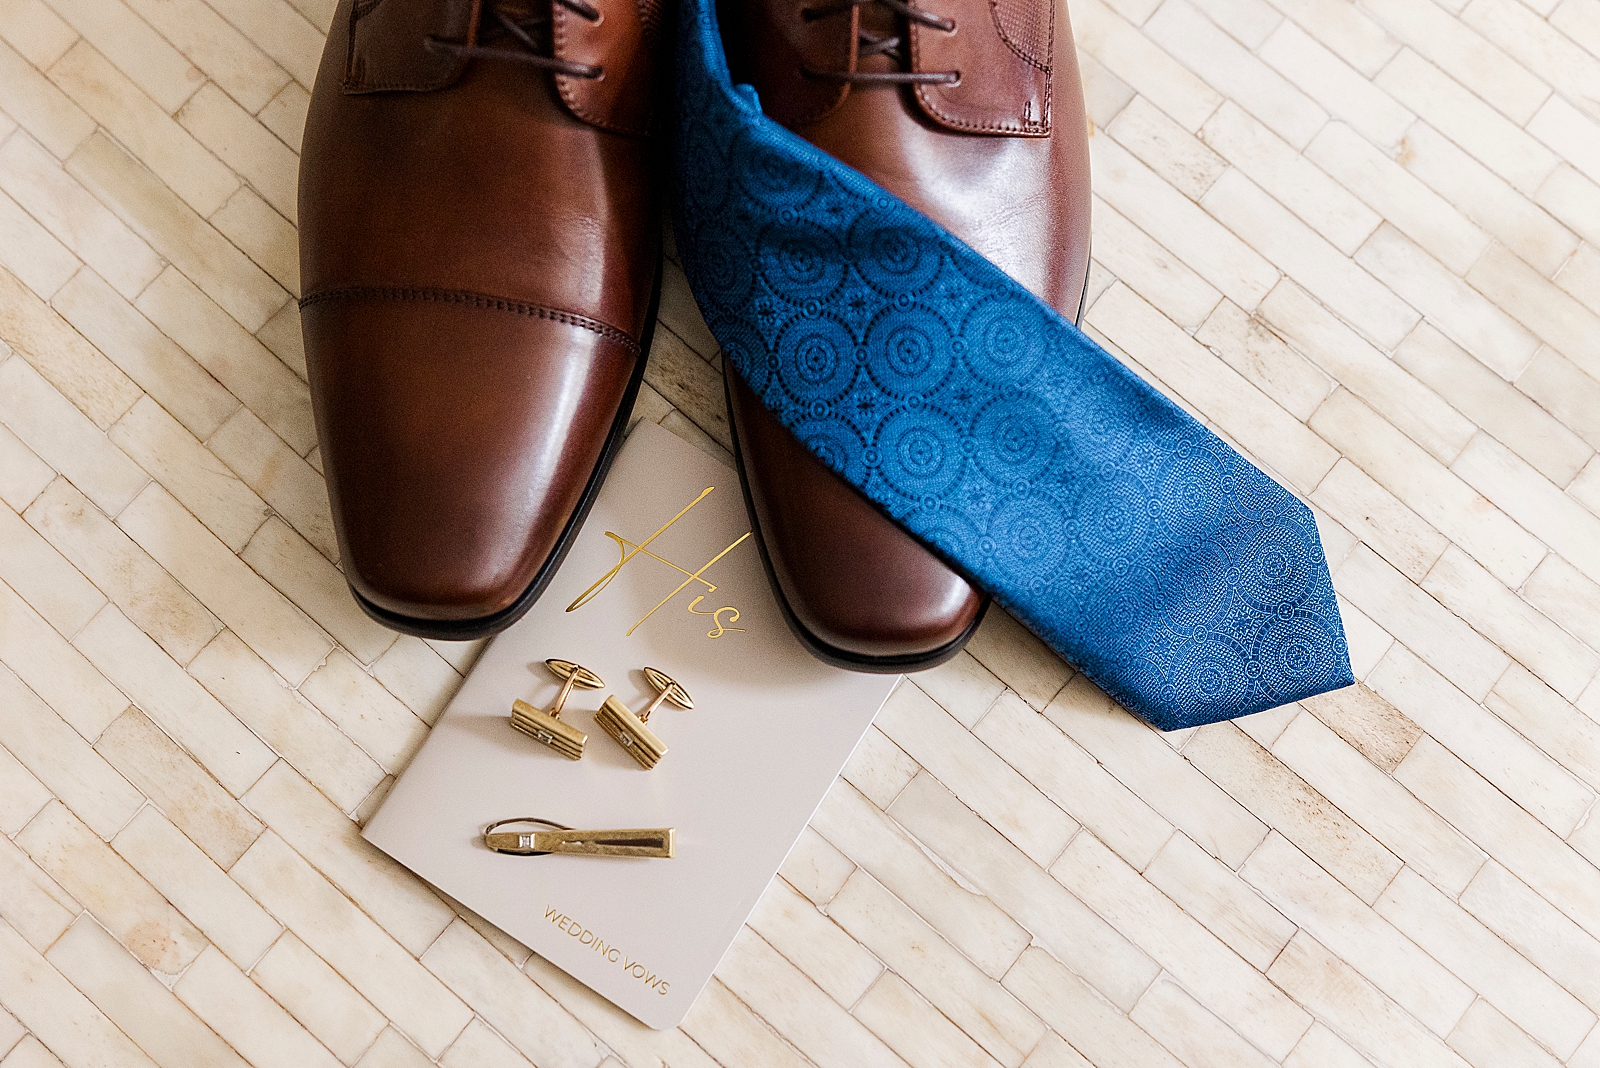 Photo of Eliseo's dress shoes, blue tie, and cuff links. 